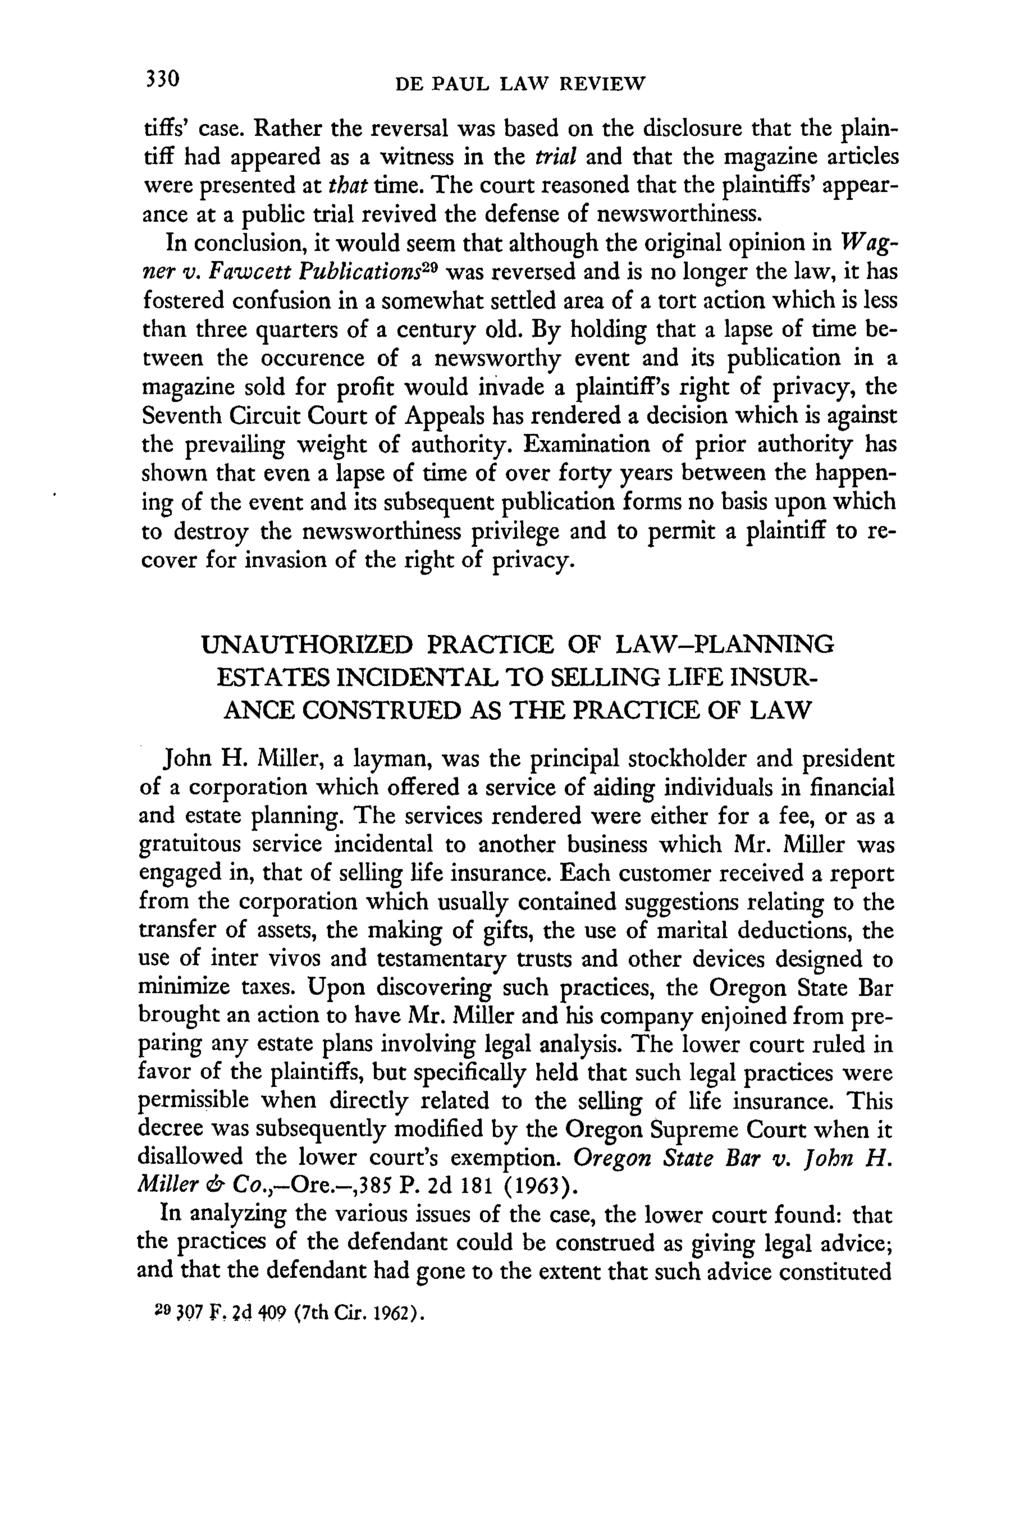 DE PAUL LAW REVIEW tiffs' case. Rather the reversal was based on the disclosure that the plaintiff had appeared as a witness in the trial and that the magazine articles were presented at that time.